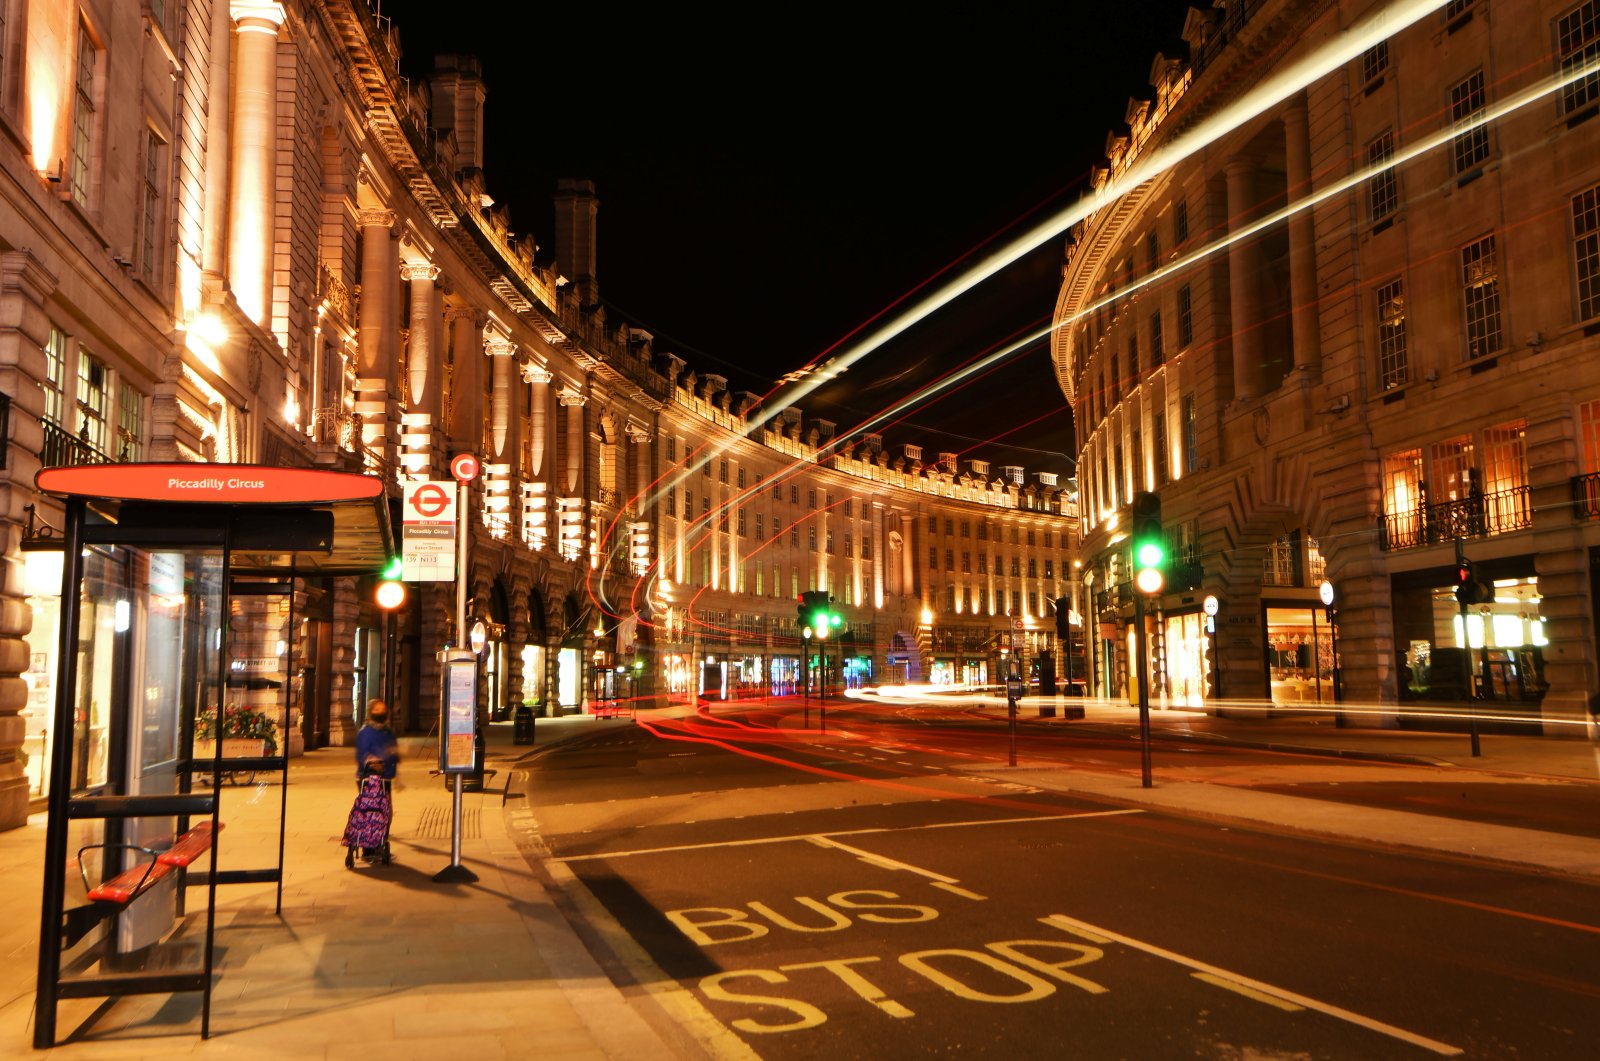 A woman waits for a bus on a quiet Regents Street during the late evening, as the city at night is deserted like never before while the coronavirus disease (COVID-19) lockdown continues, in London, Britain April 21, 2020. (Reuters Photo)